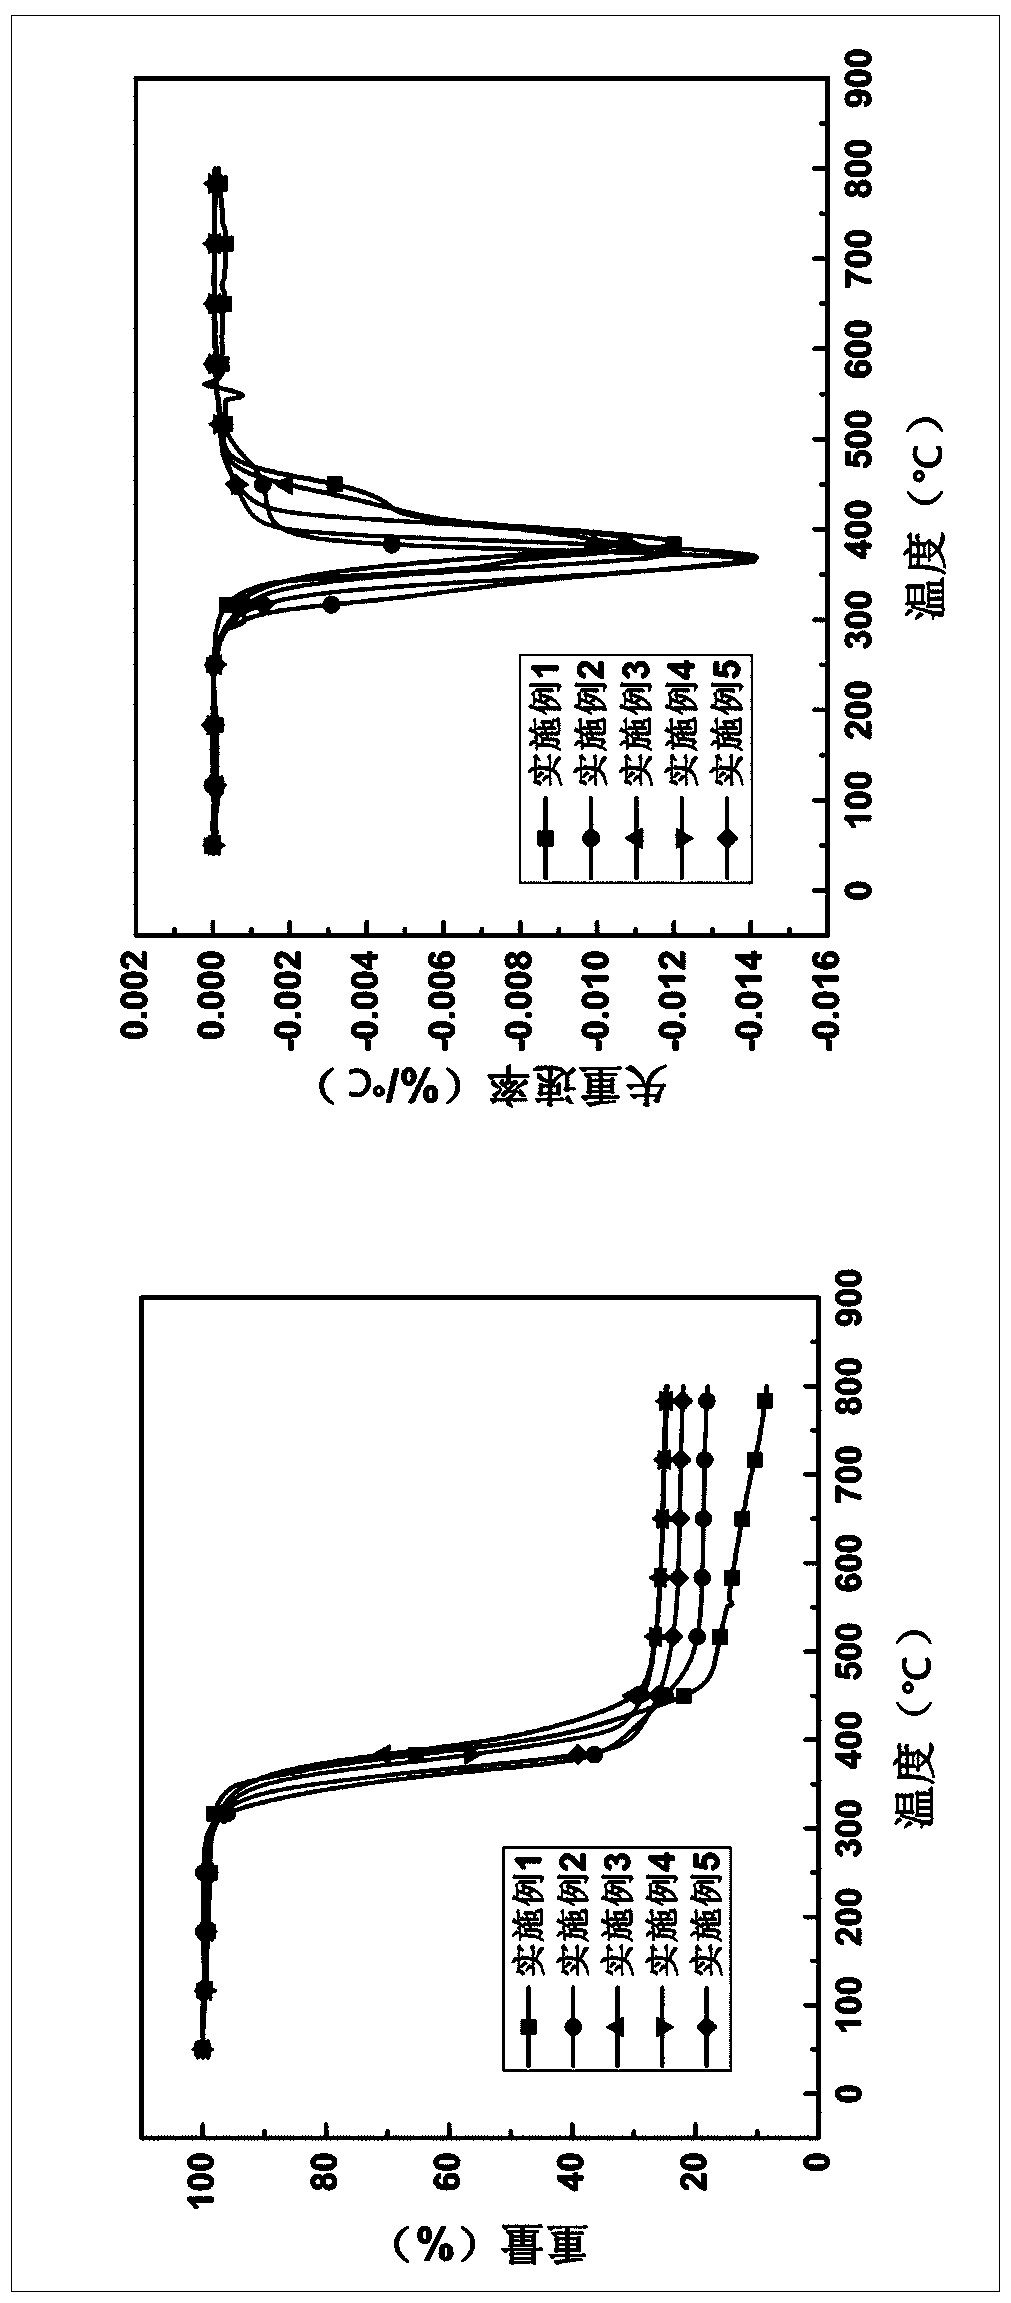 Expandable novel epoxy resin composite flame-retardant material and preparation method thereof